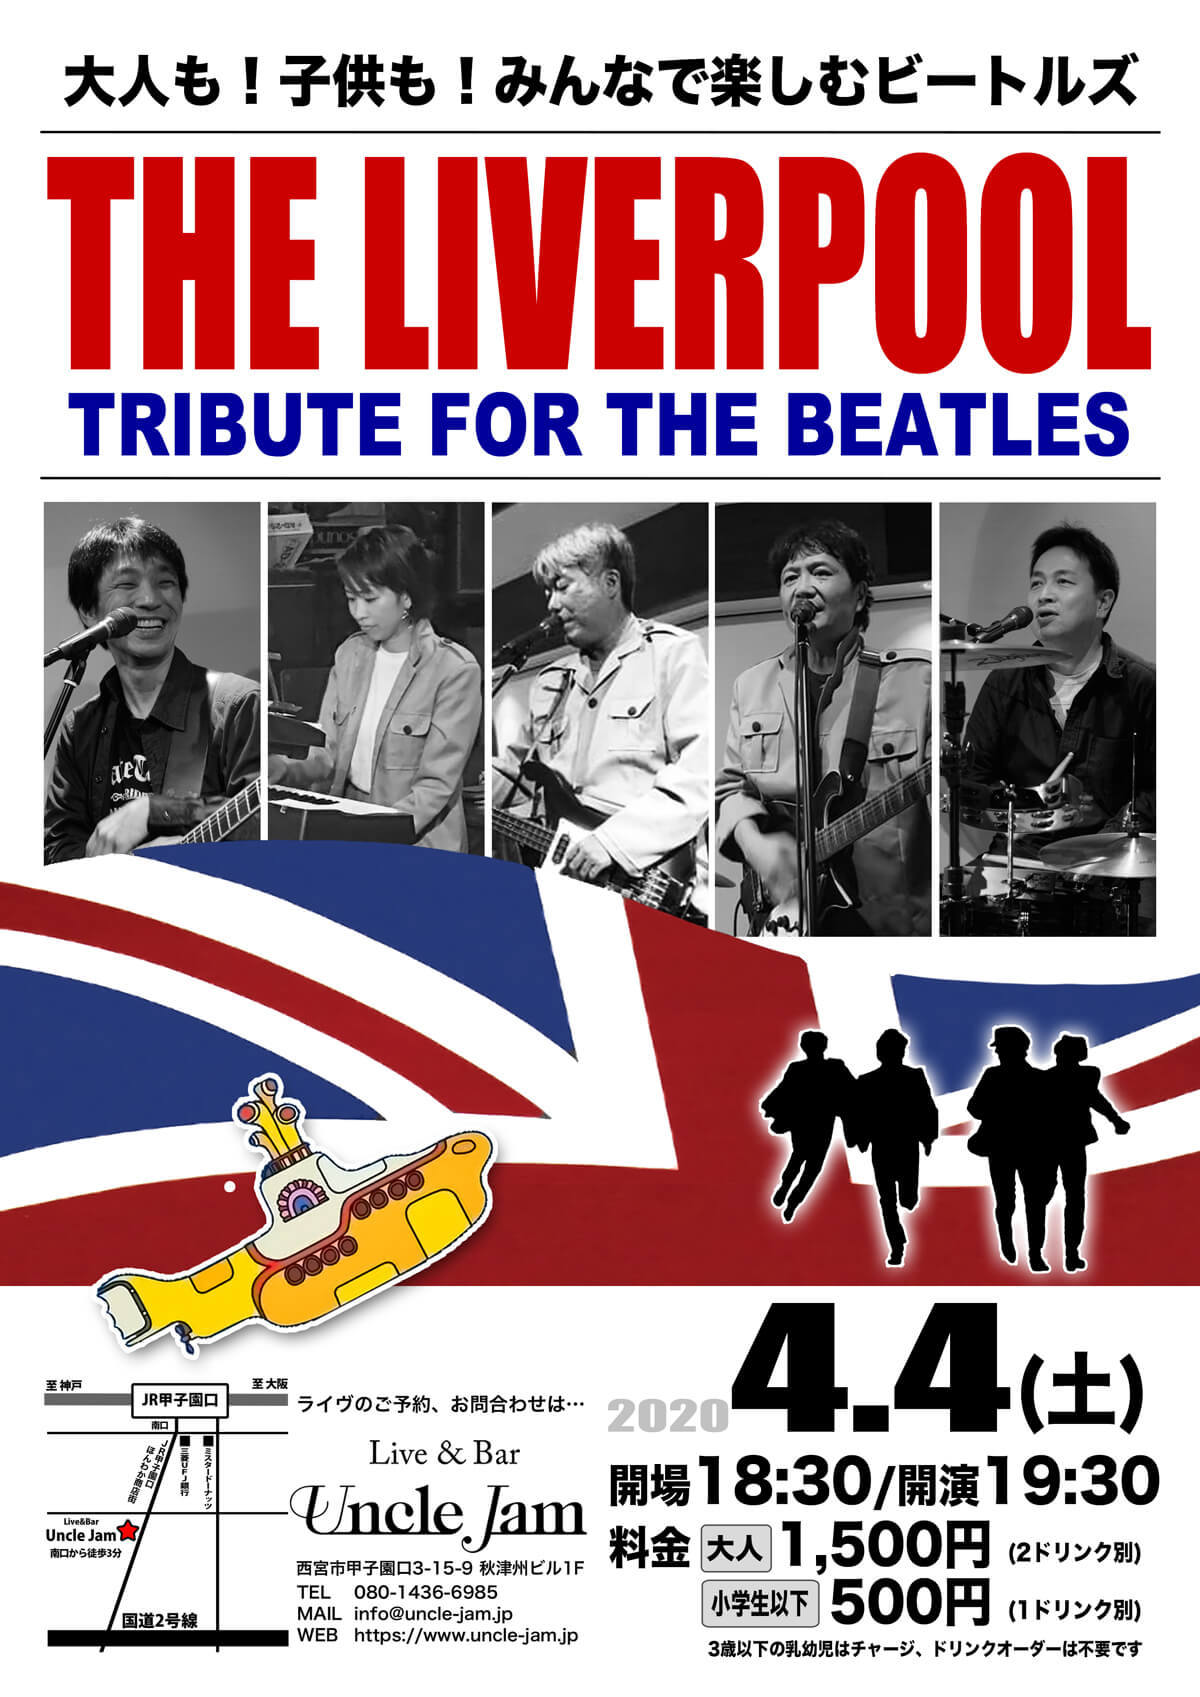 2020-04-04_The_Liverpool